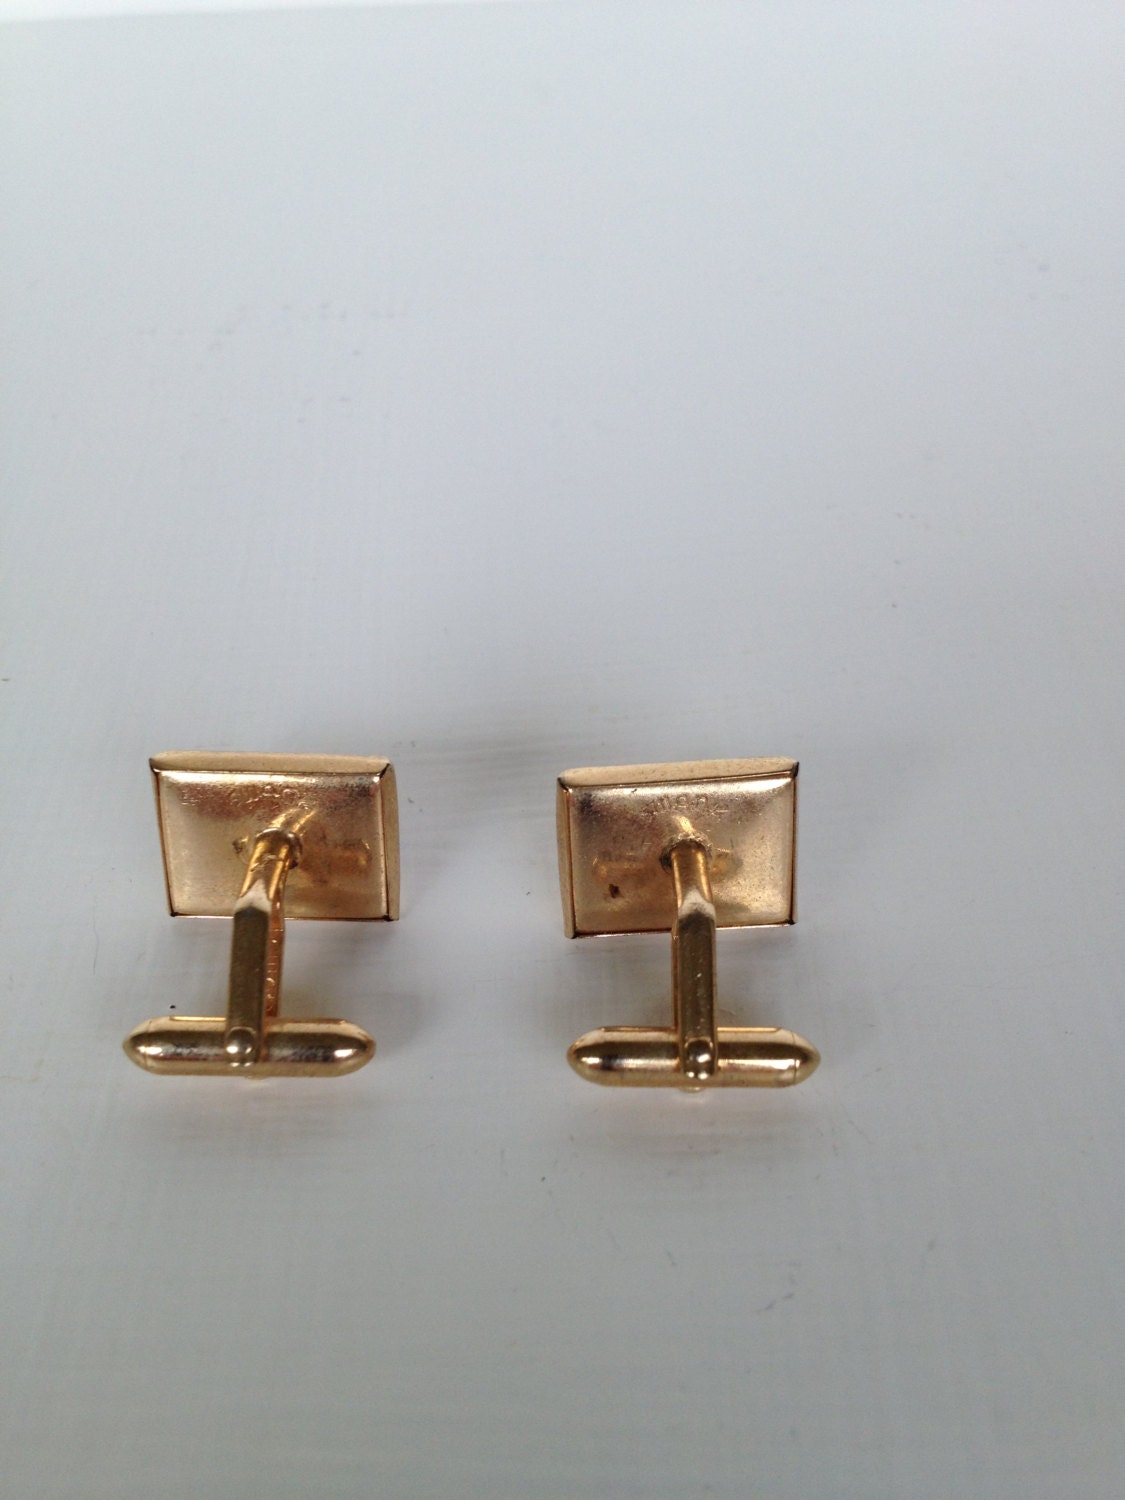 Vintage Swank Cufflinks Beautiful Red and Gold - Etsy